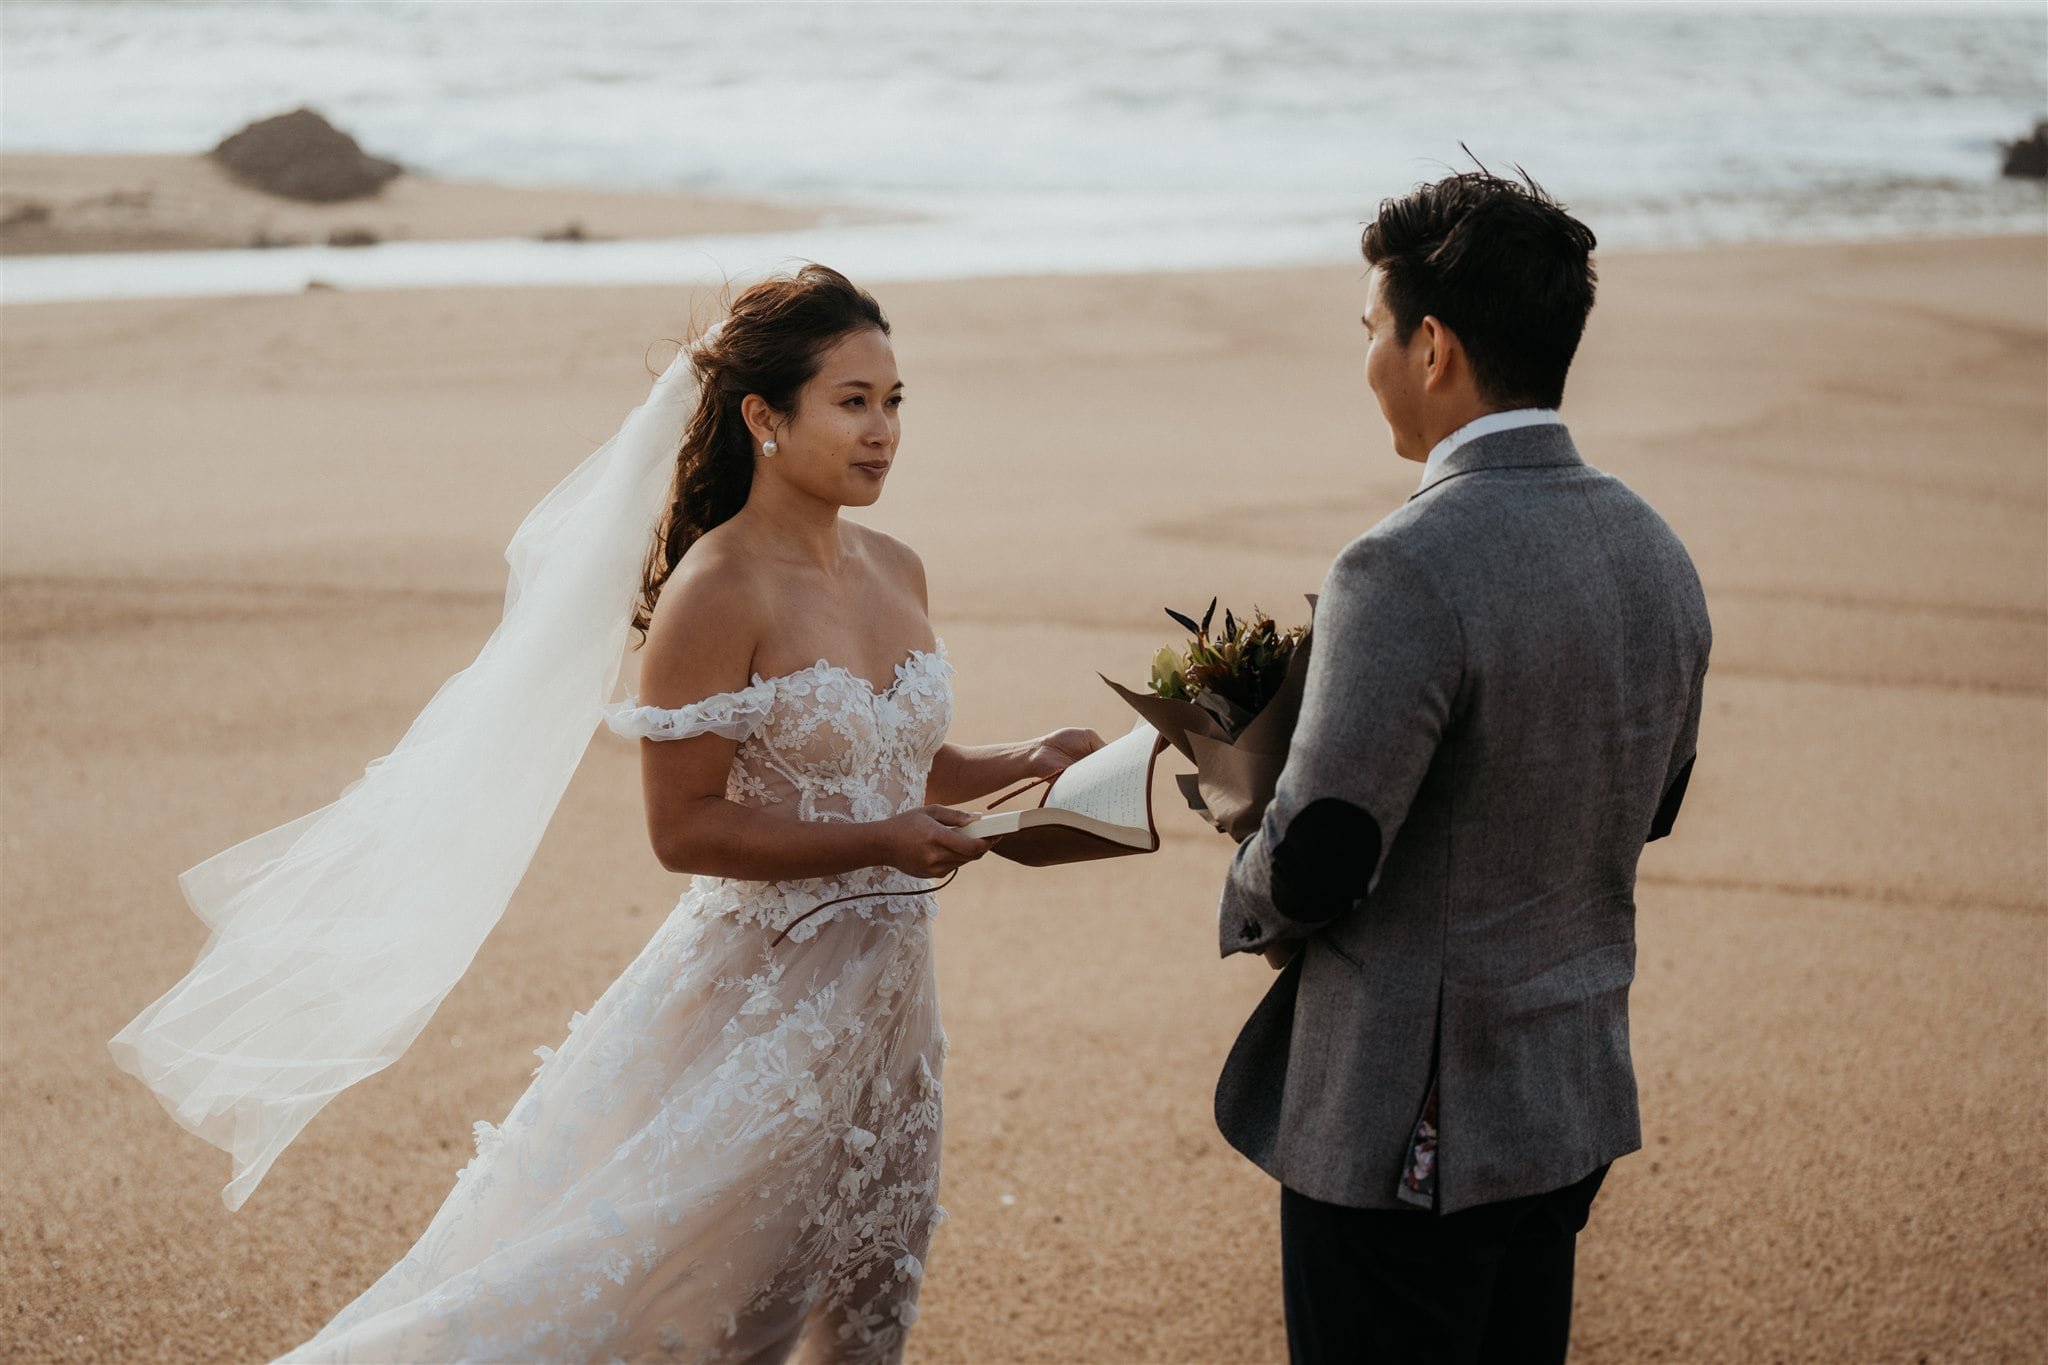 Bride and groom exchange vows on the beach during Japan elopement